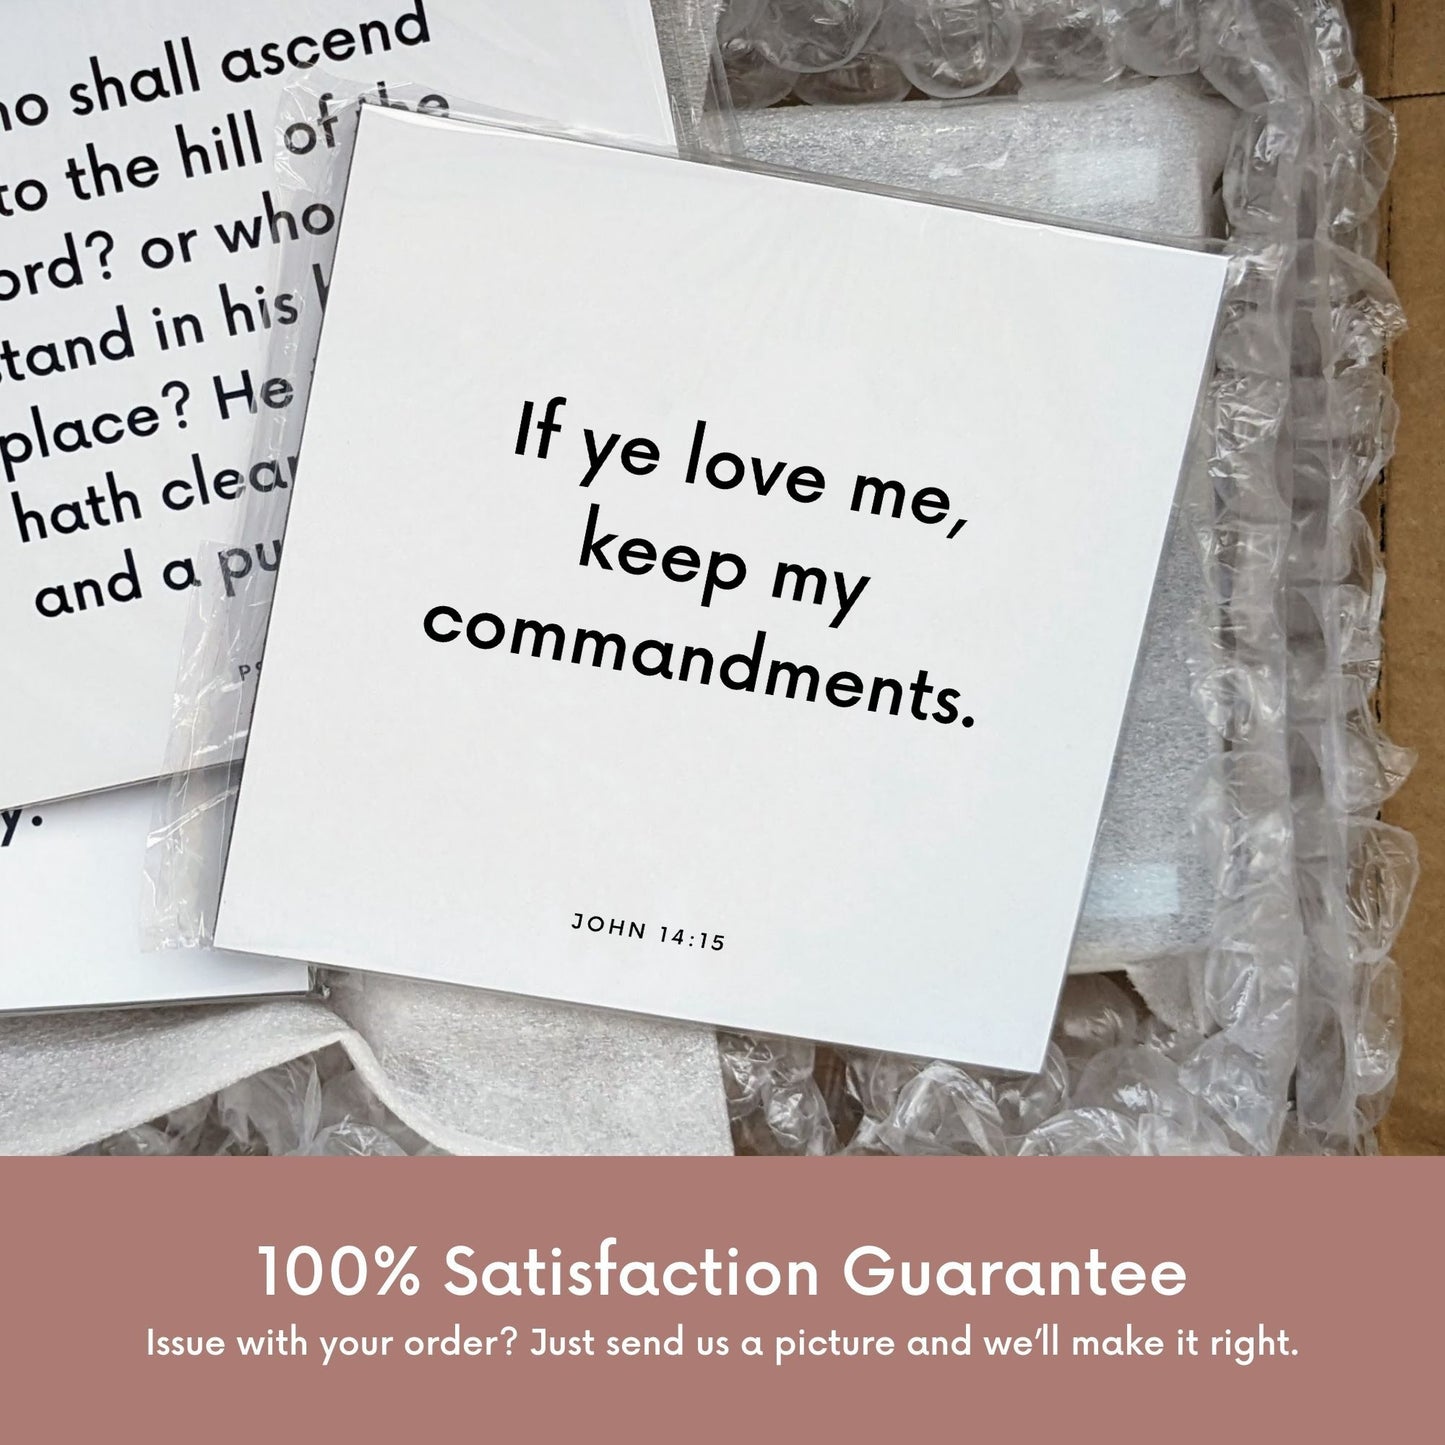 Shipping materials for scripture tile of John 14:15 - "If ye love me, keep my commandments"